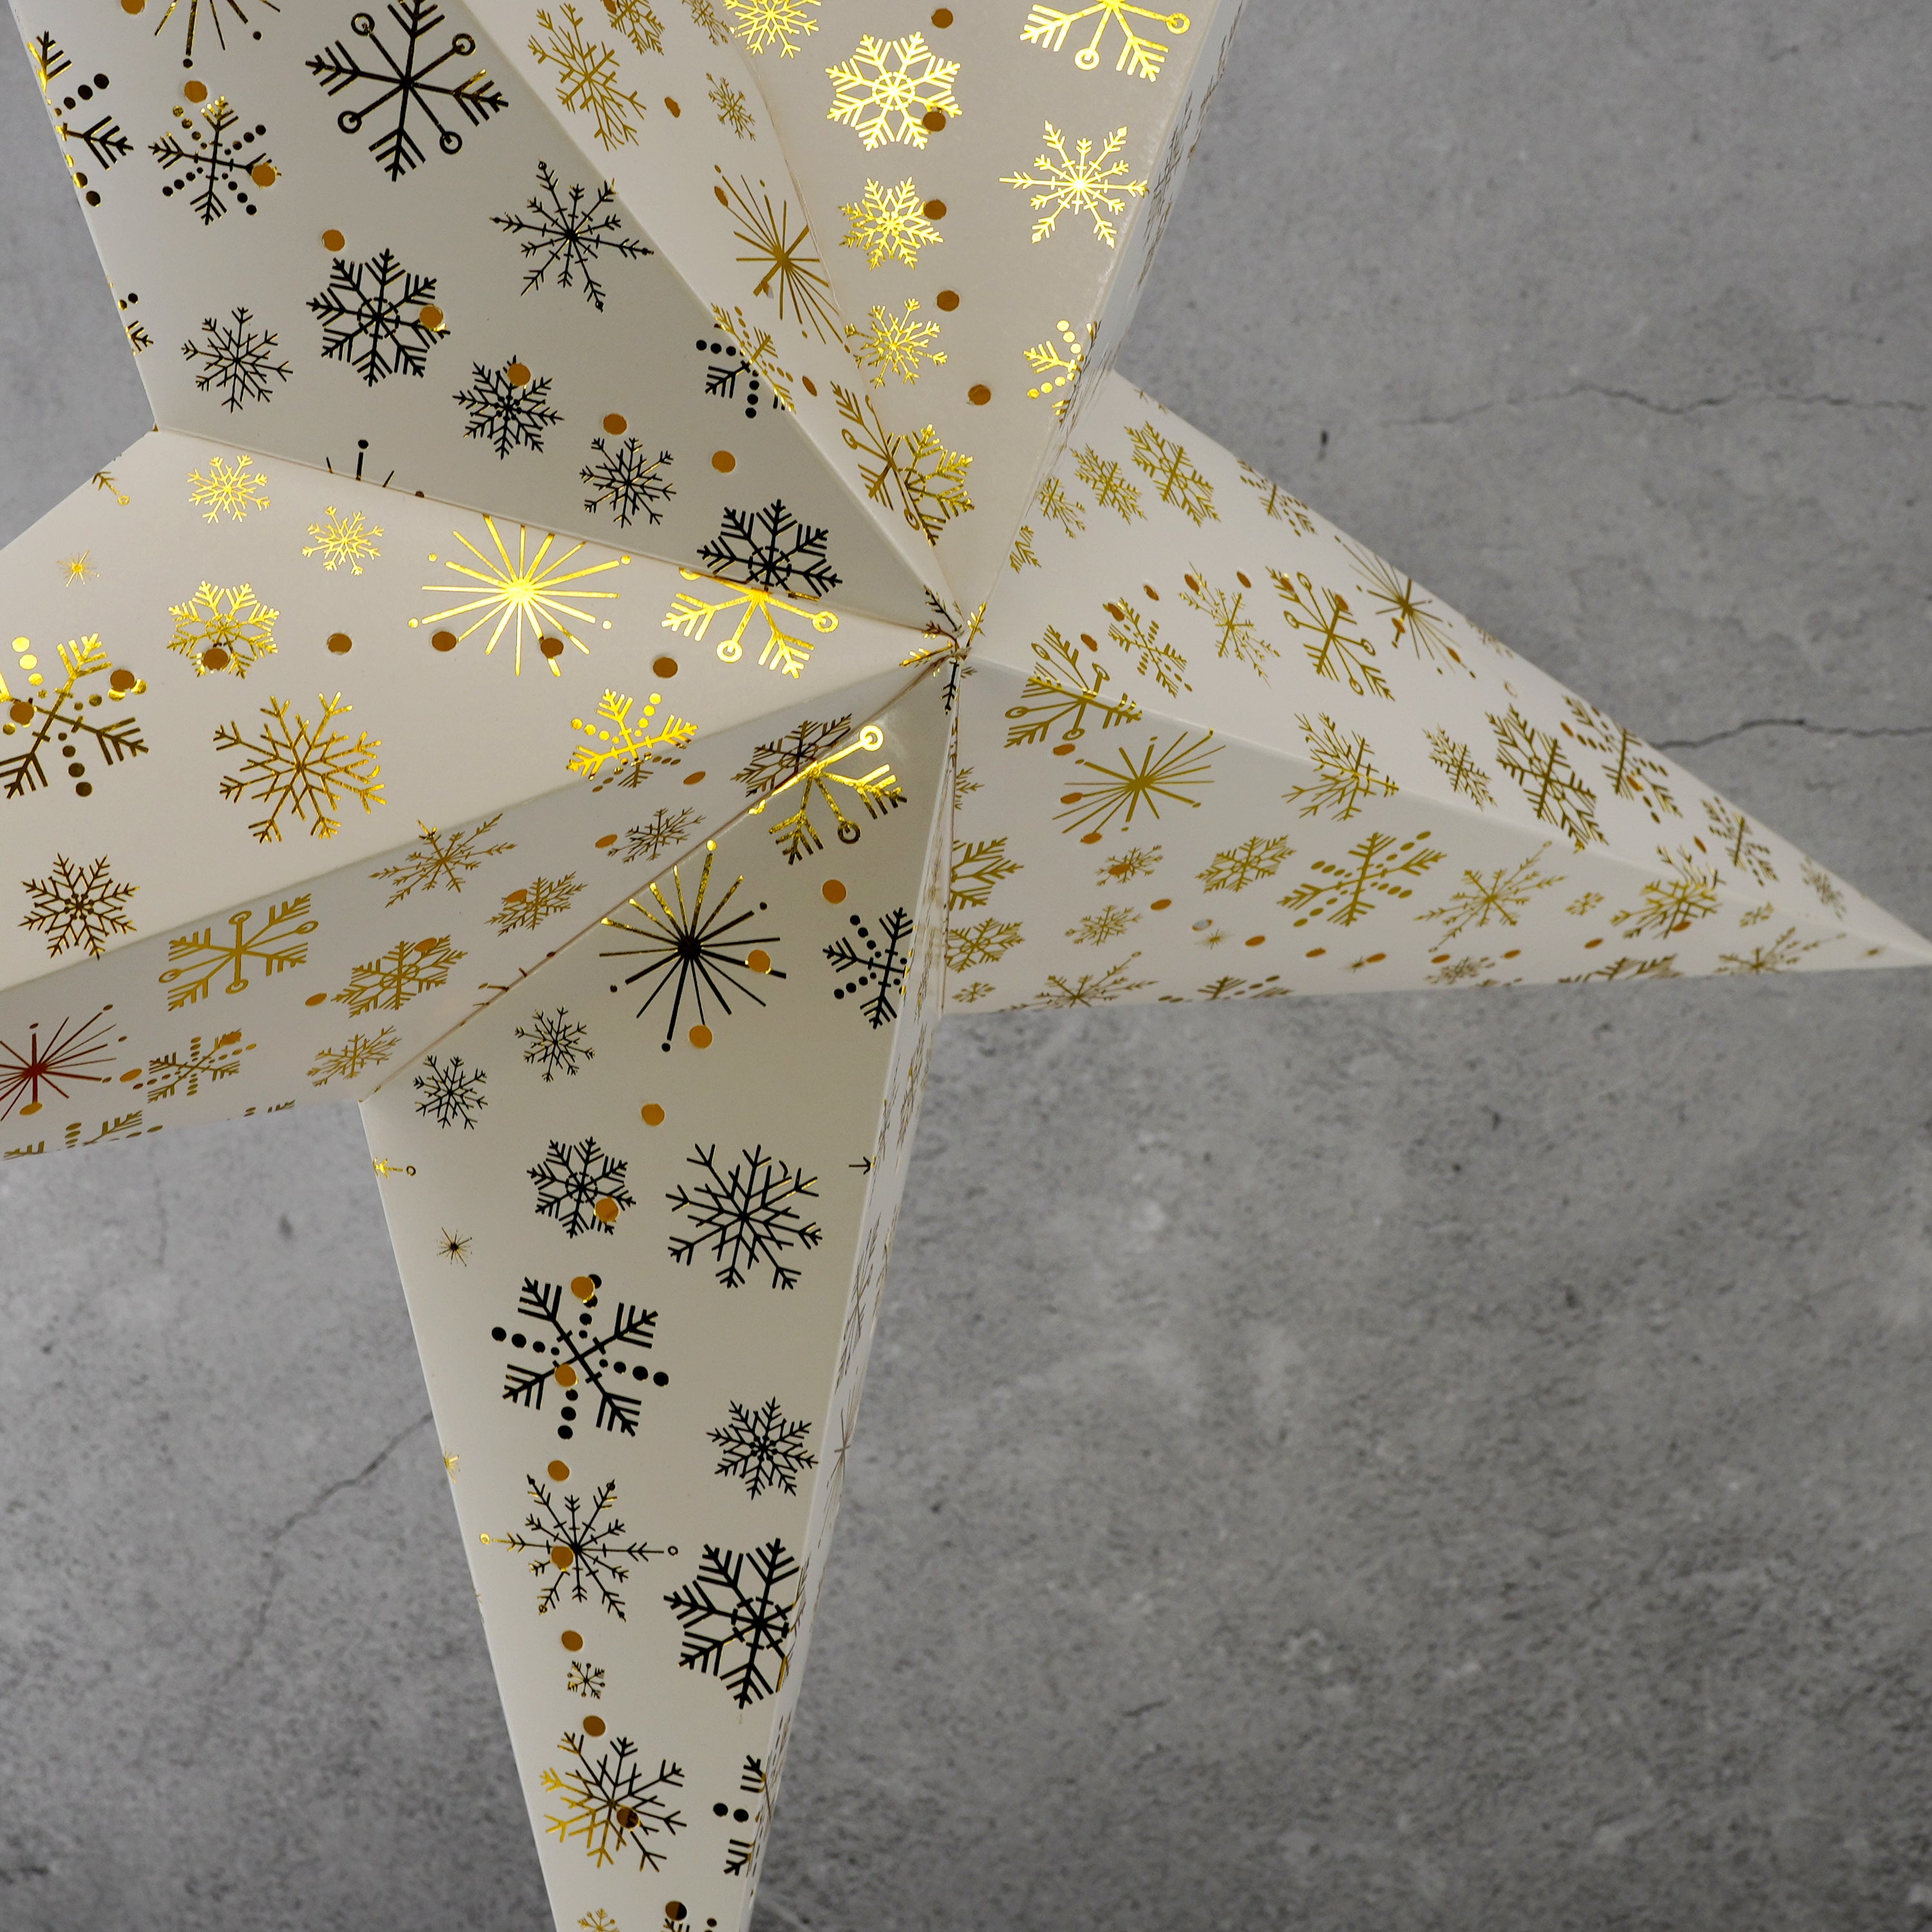 75 cm LED Hanging Paper Star Lantern GEEZY - The Magic Toy Shop